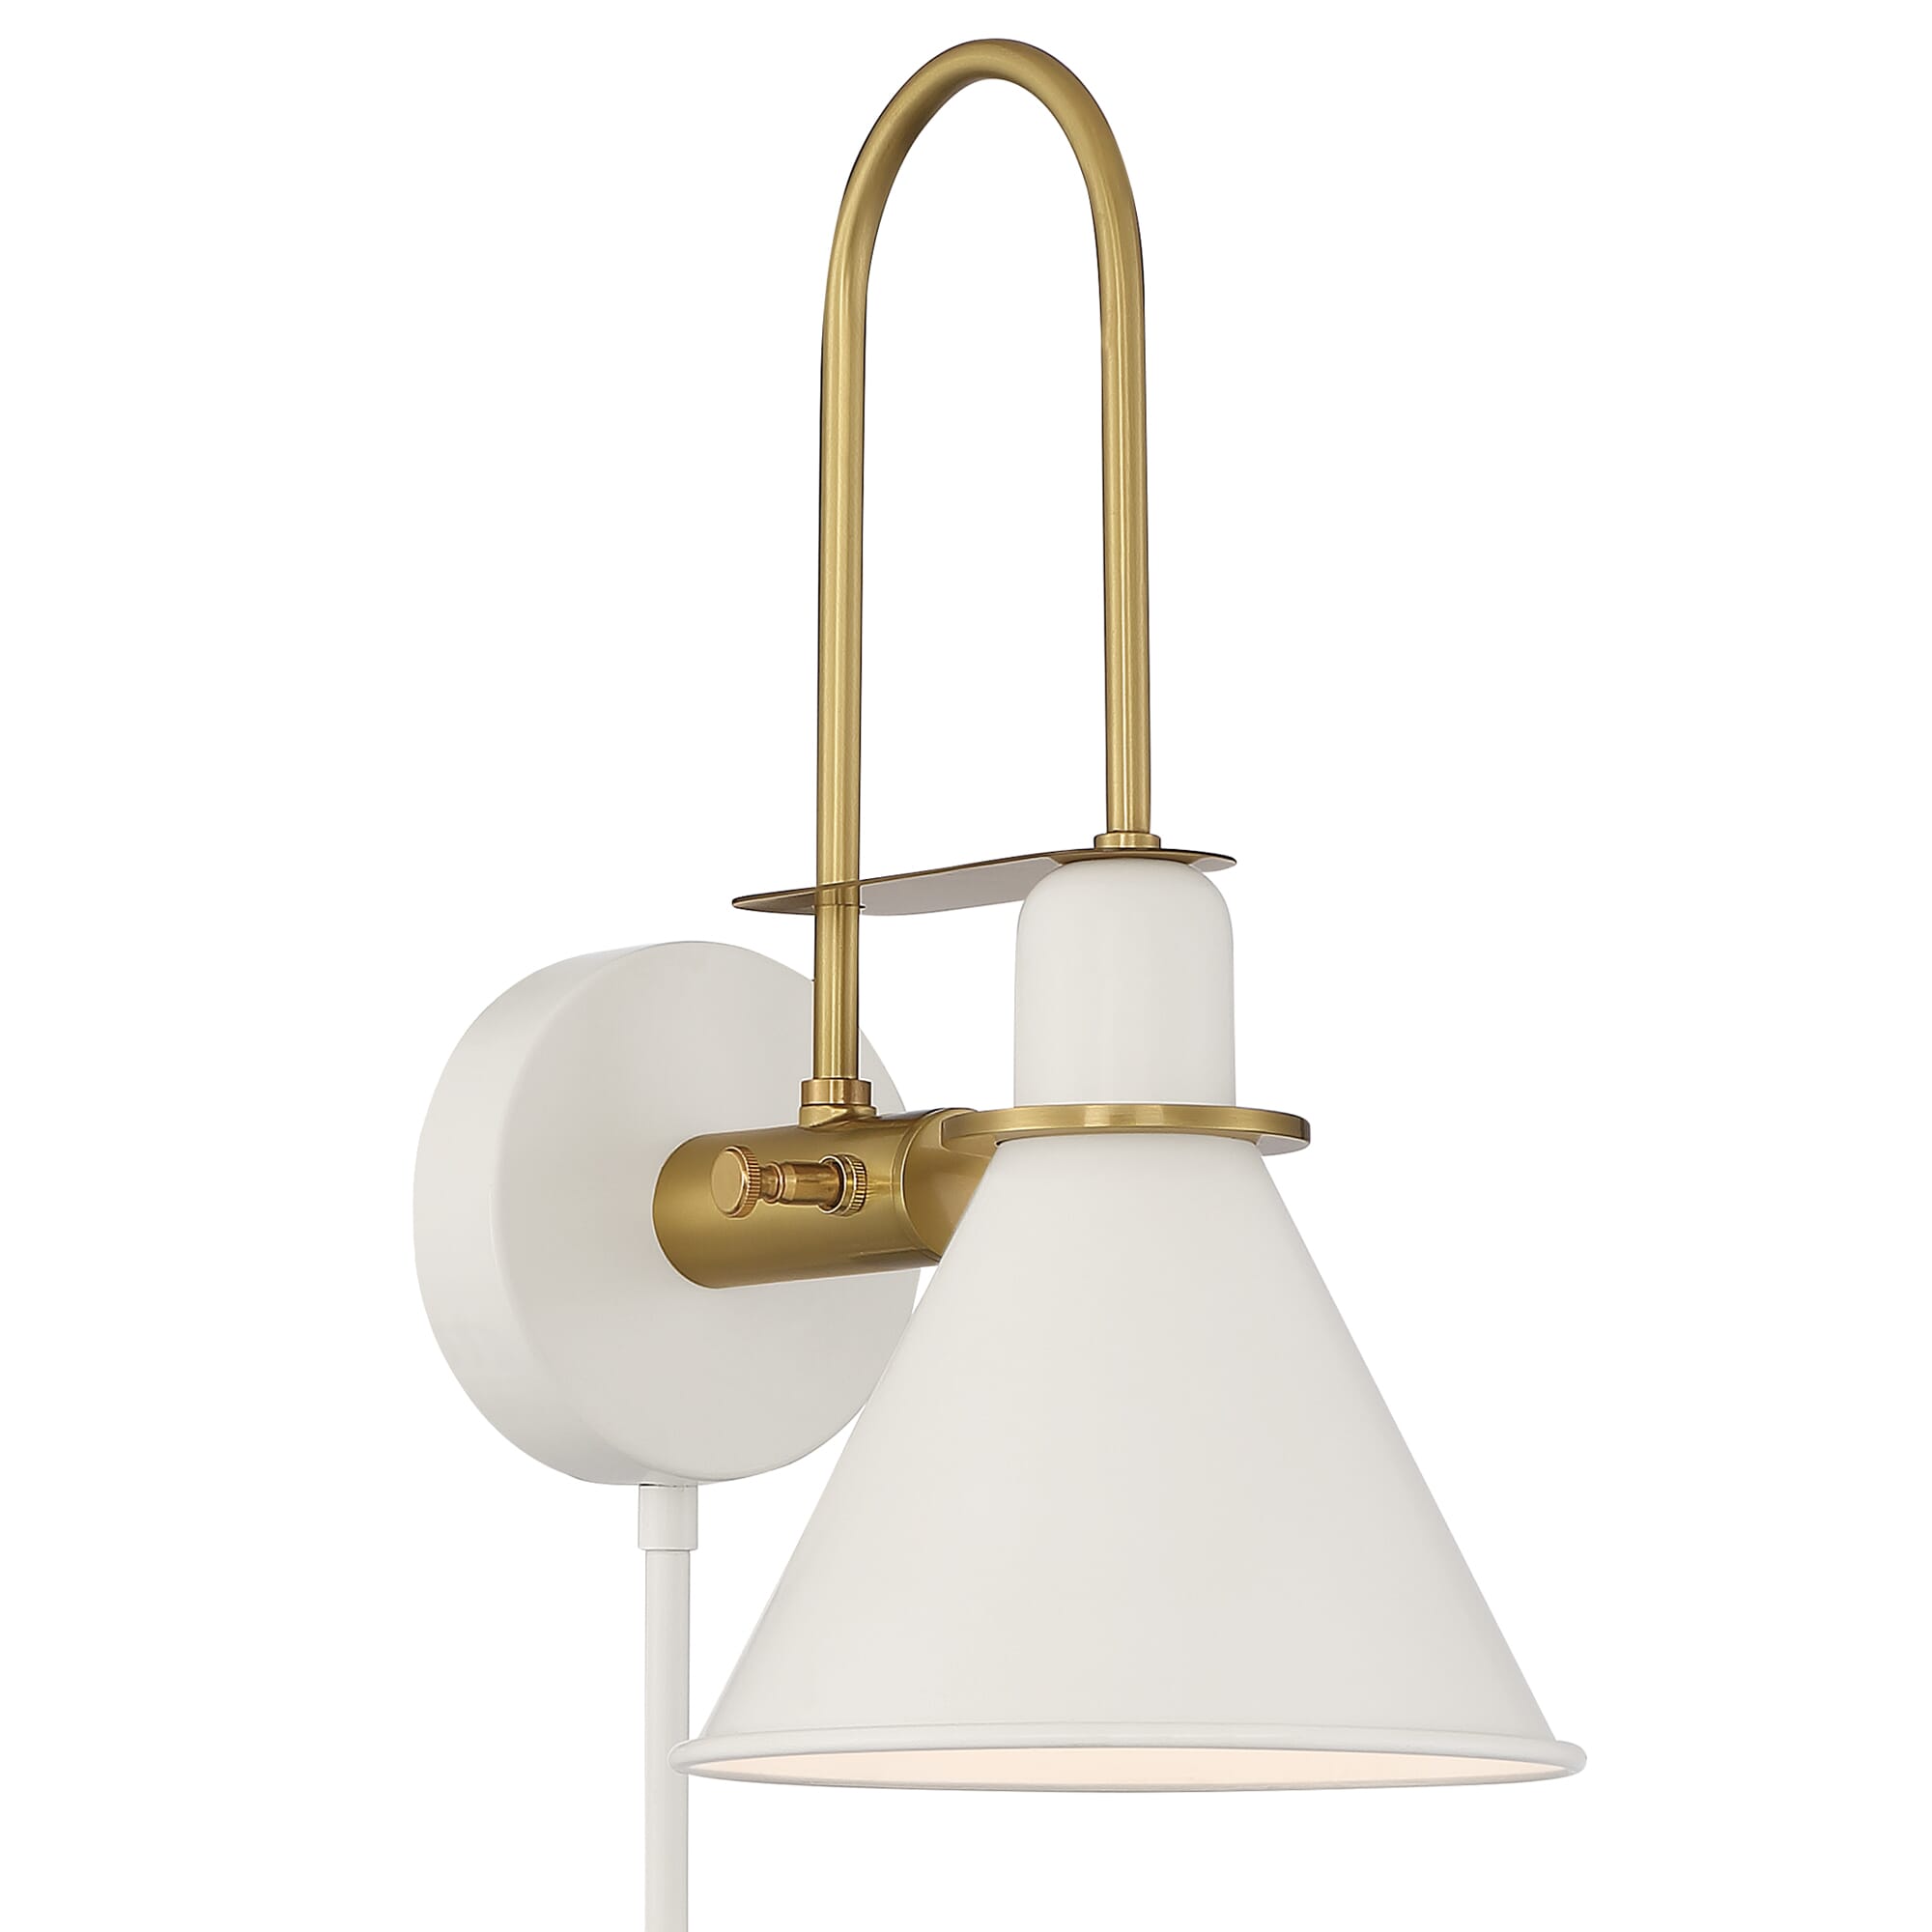 Crystorama Medford Wall Sconce in White -  MED-B5501-WH